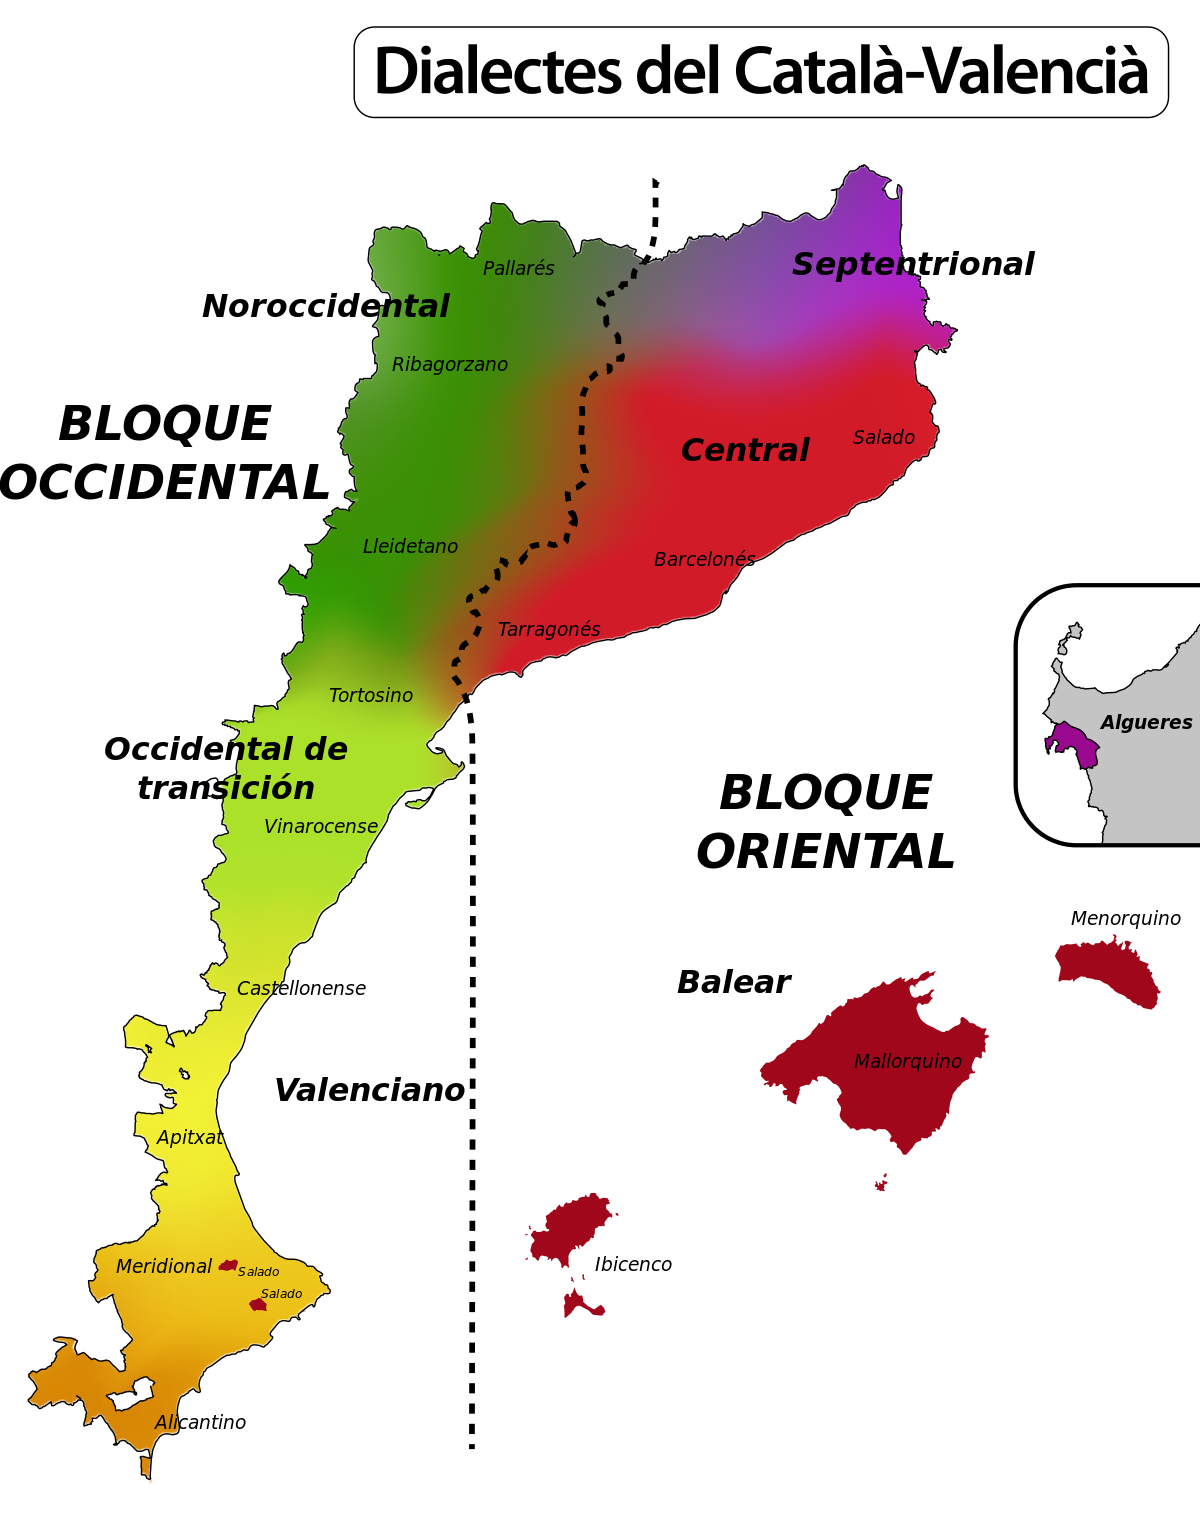 File:Mapa dialectal del catalán.png - Wikimedia Commons